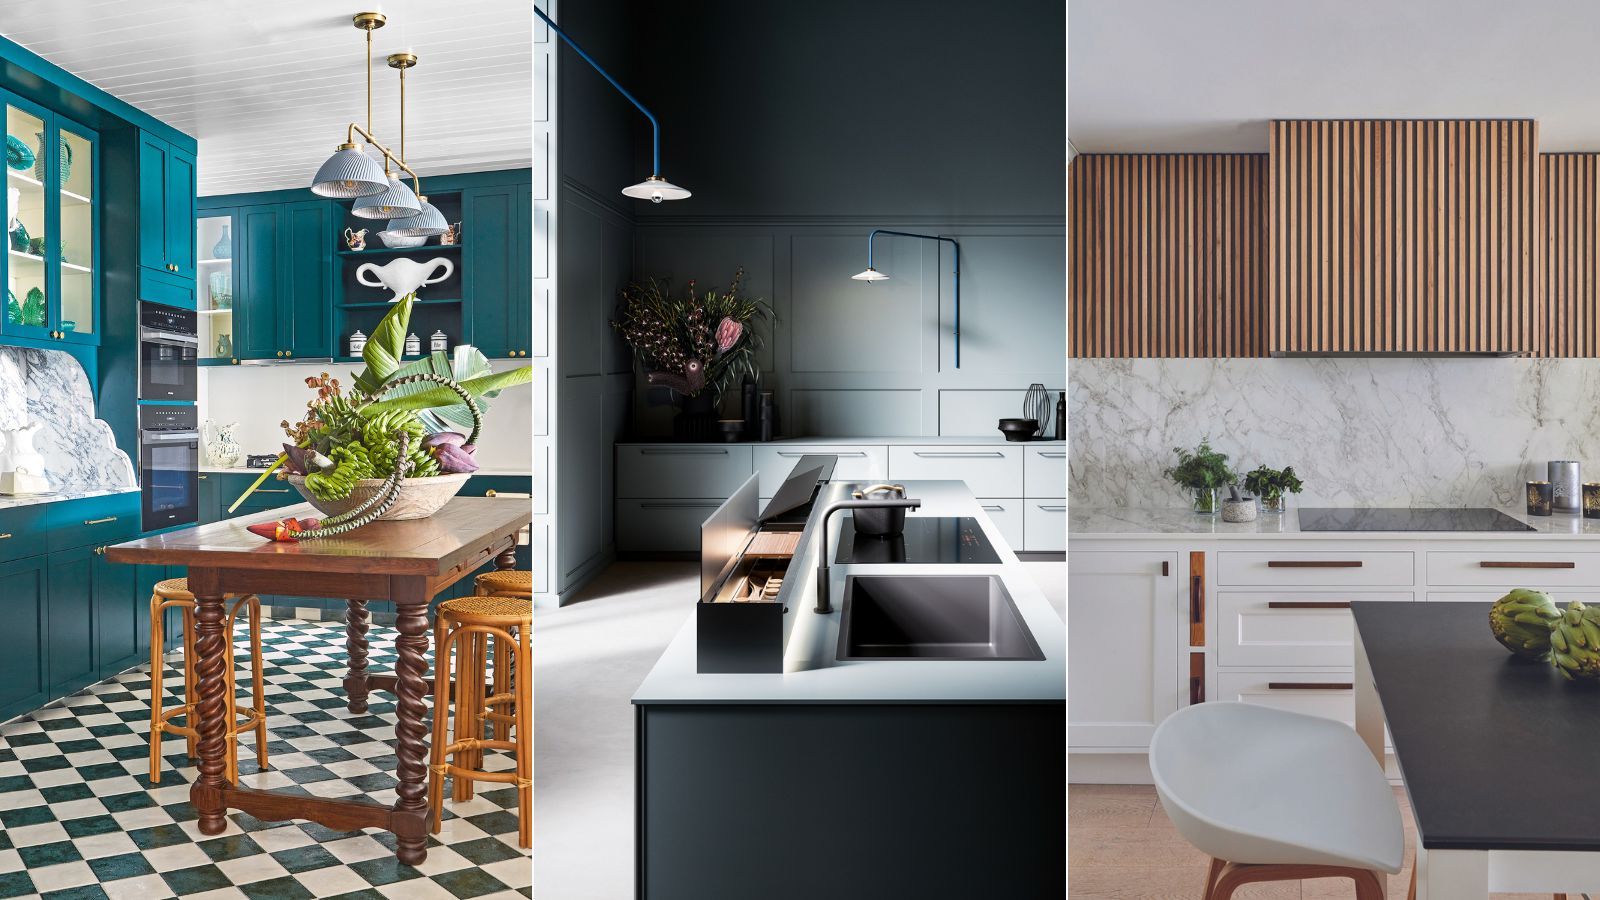 Do kitchen colors mean anything? And what do they say about you?